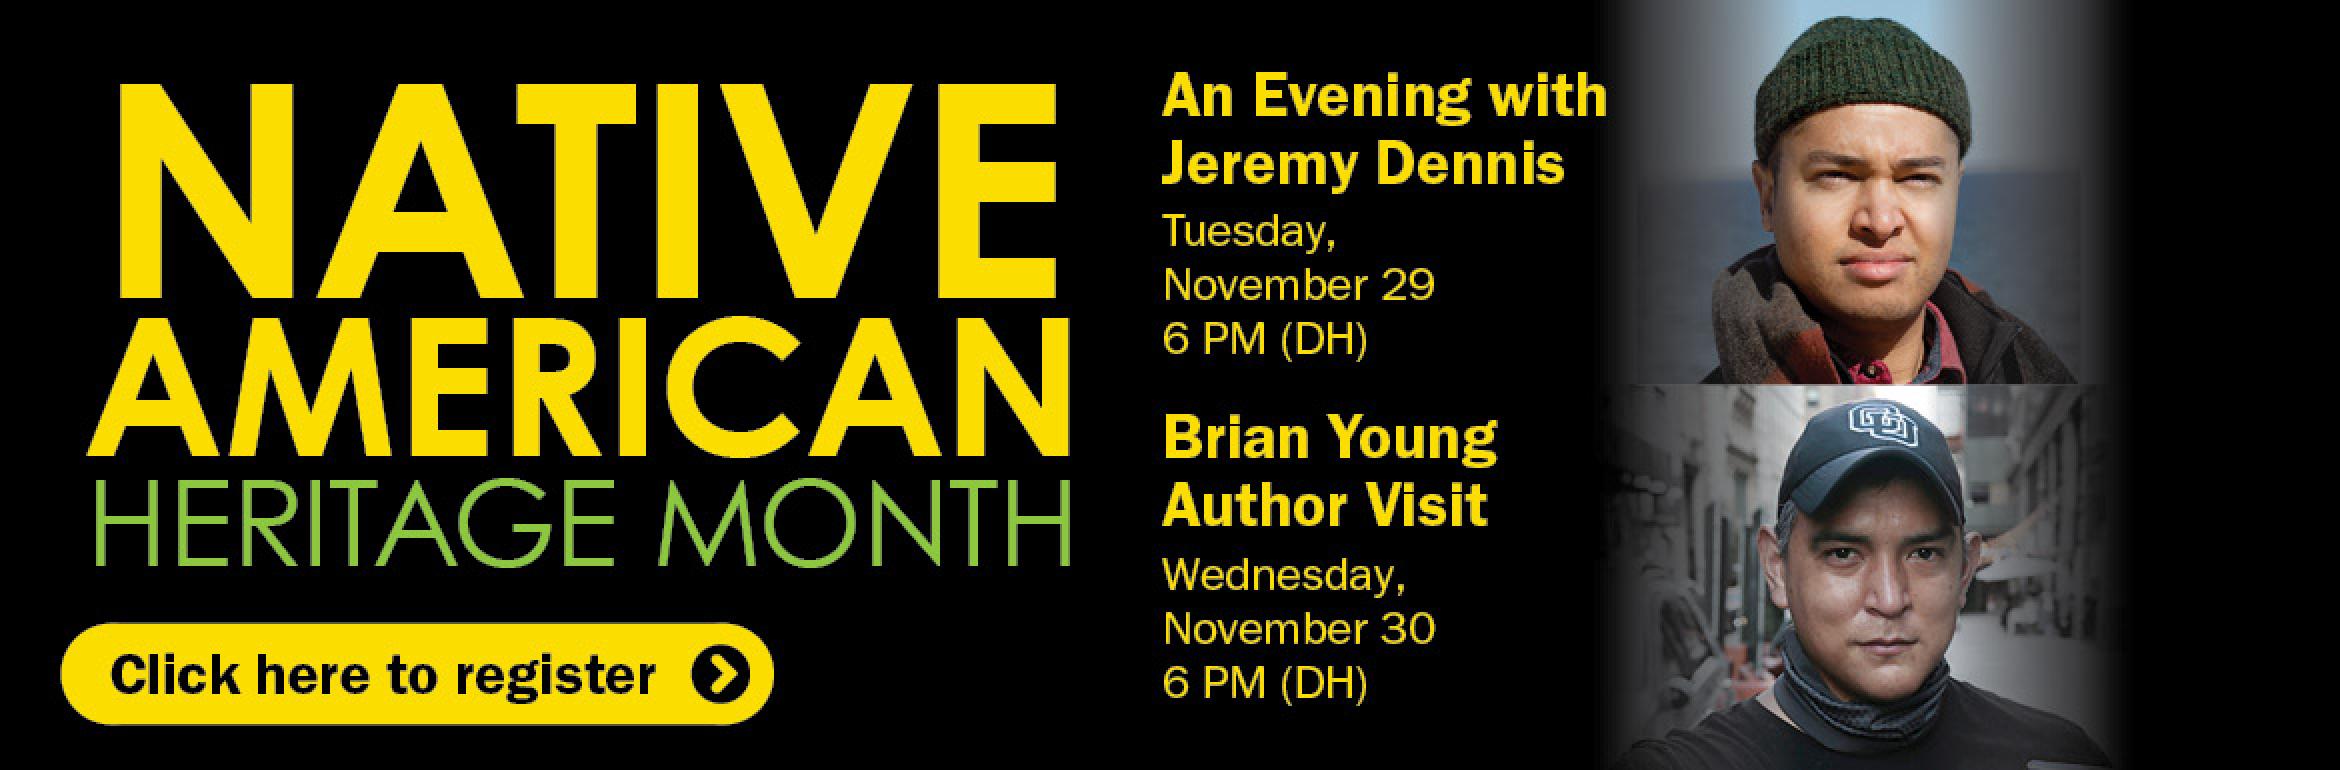 Native American Heritage Month. An Evening with Jeremy Dennis. Tuesday, November 29, 6 PM (DH). Brian Young Author Visit. Wednesday, November 30, 6 PM (DH). Click here to register.